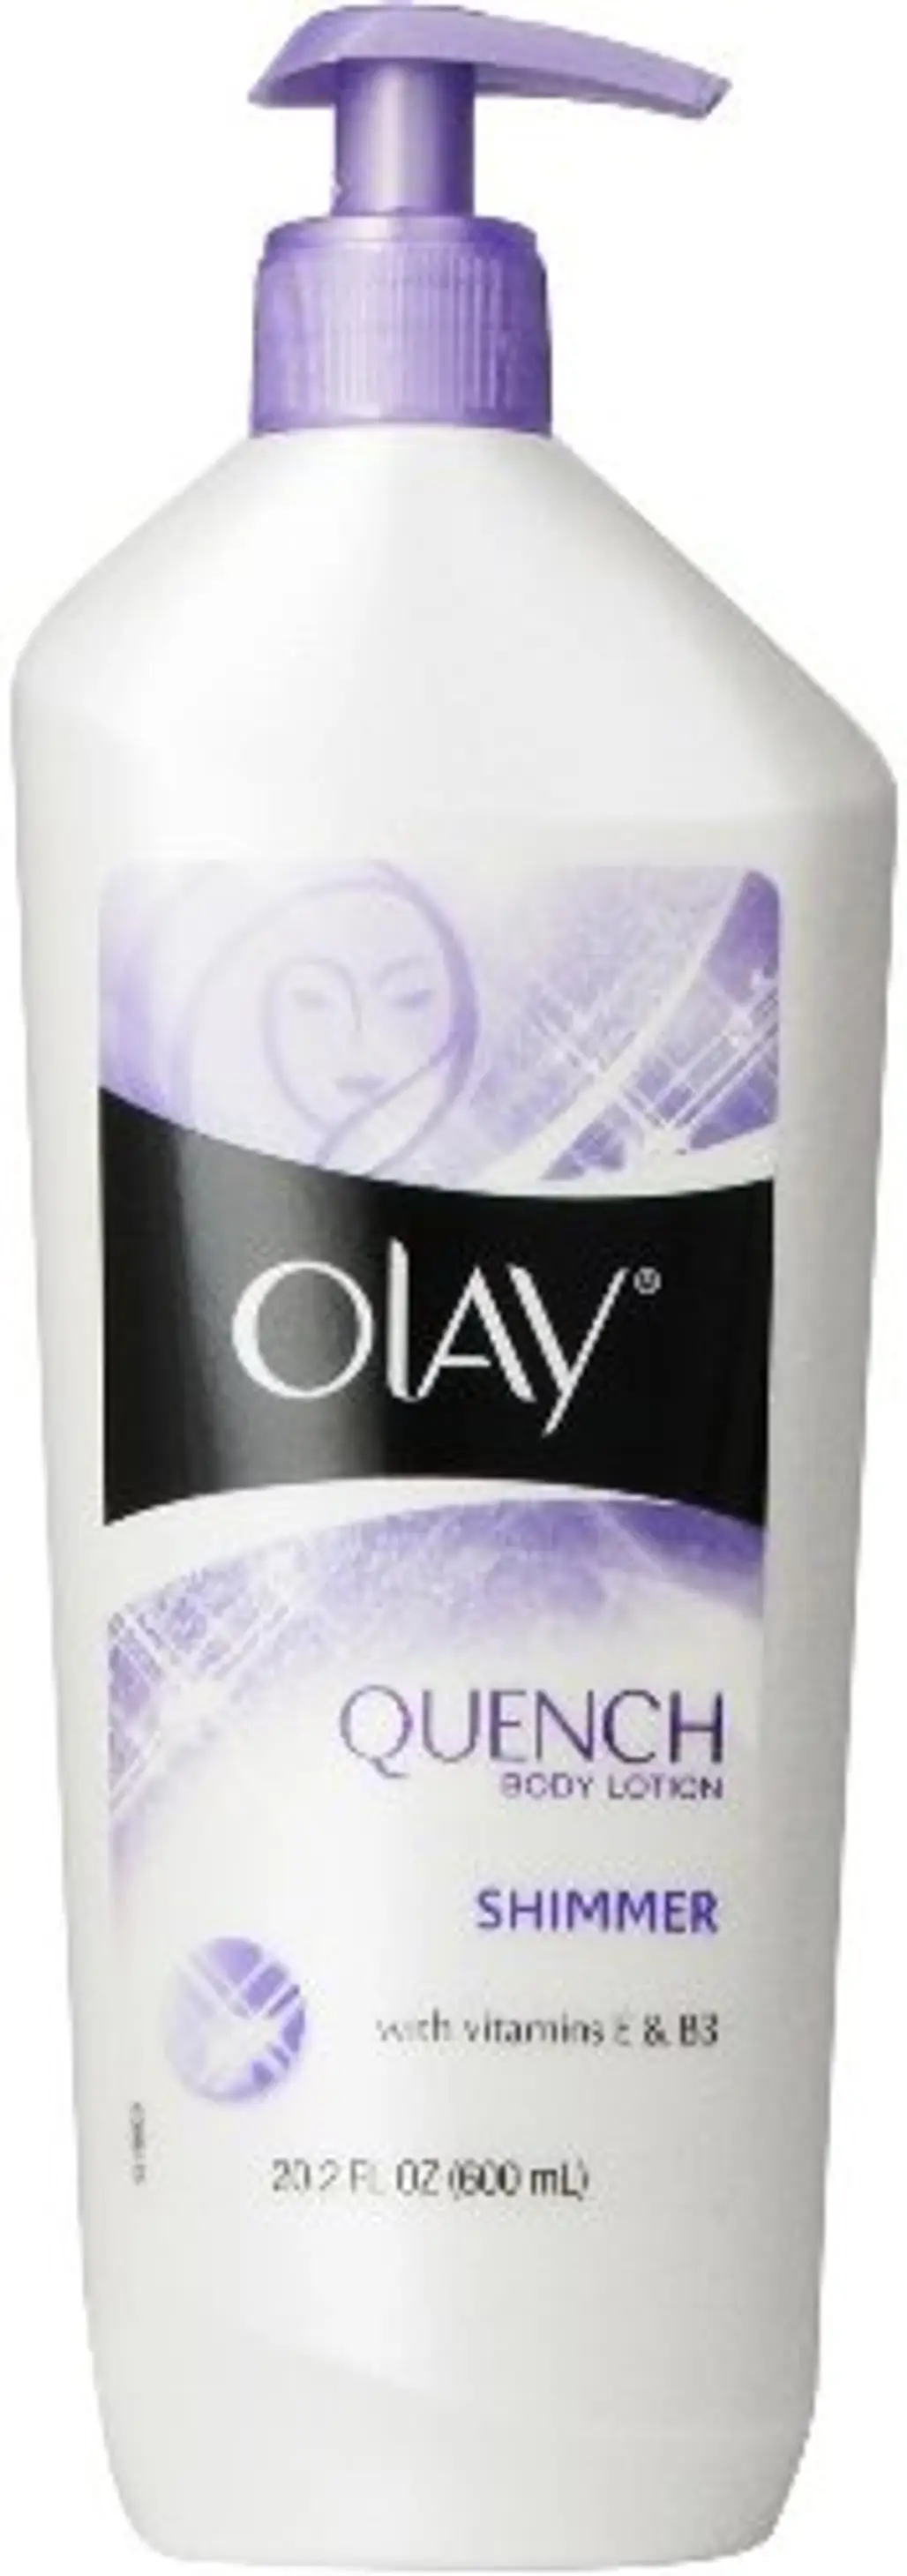 Olay Quench Body Lotion Shimmer